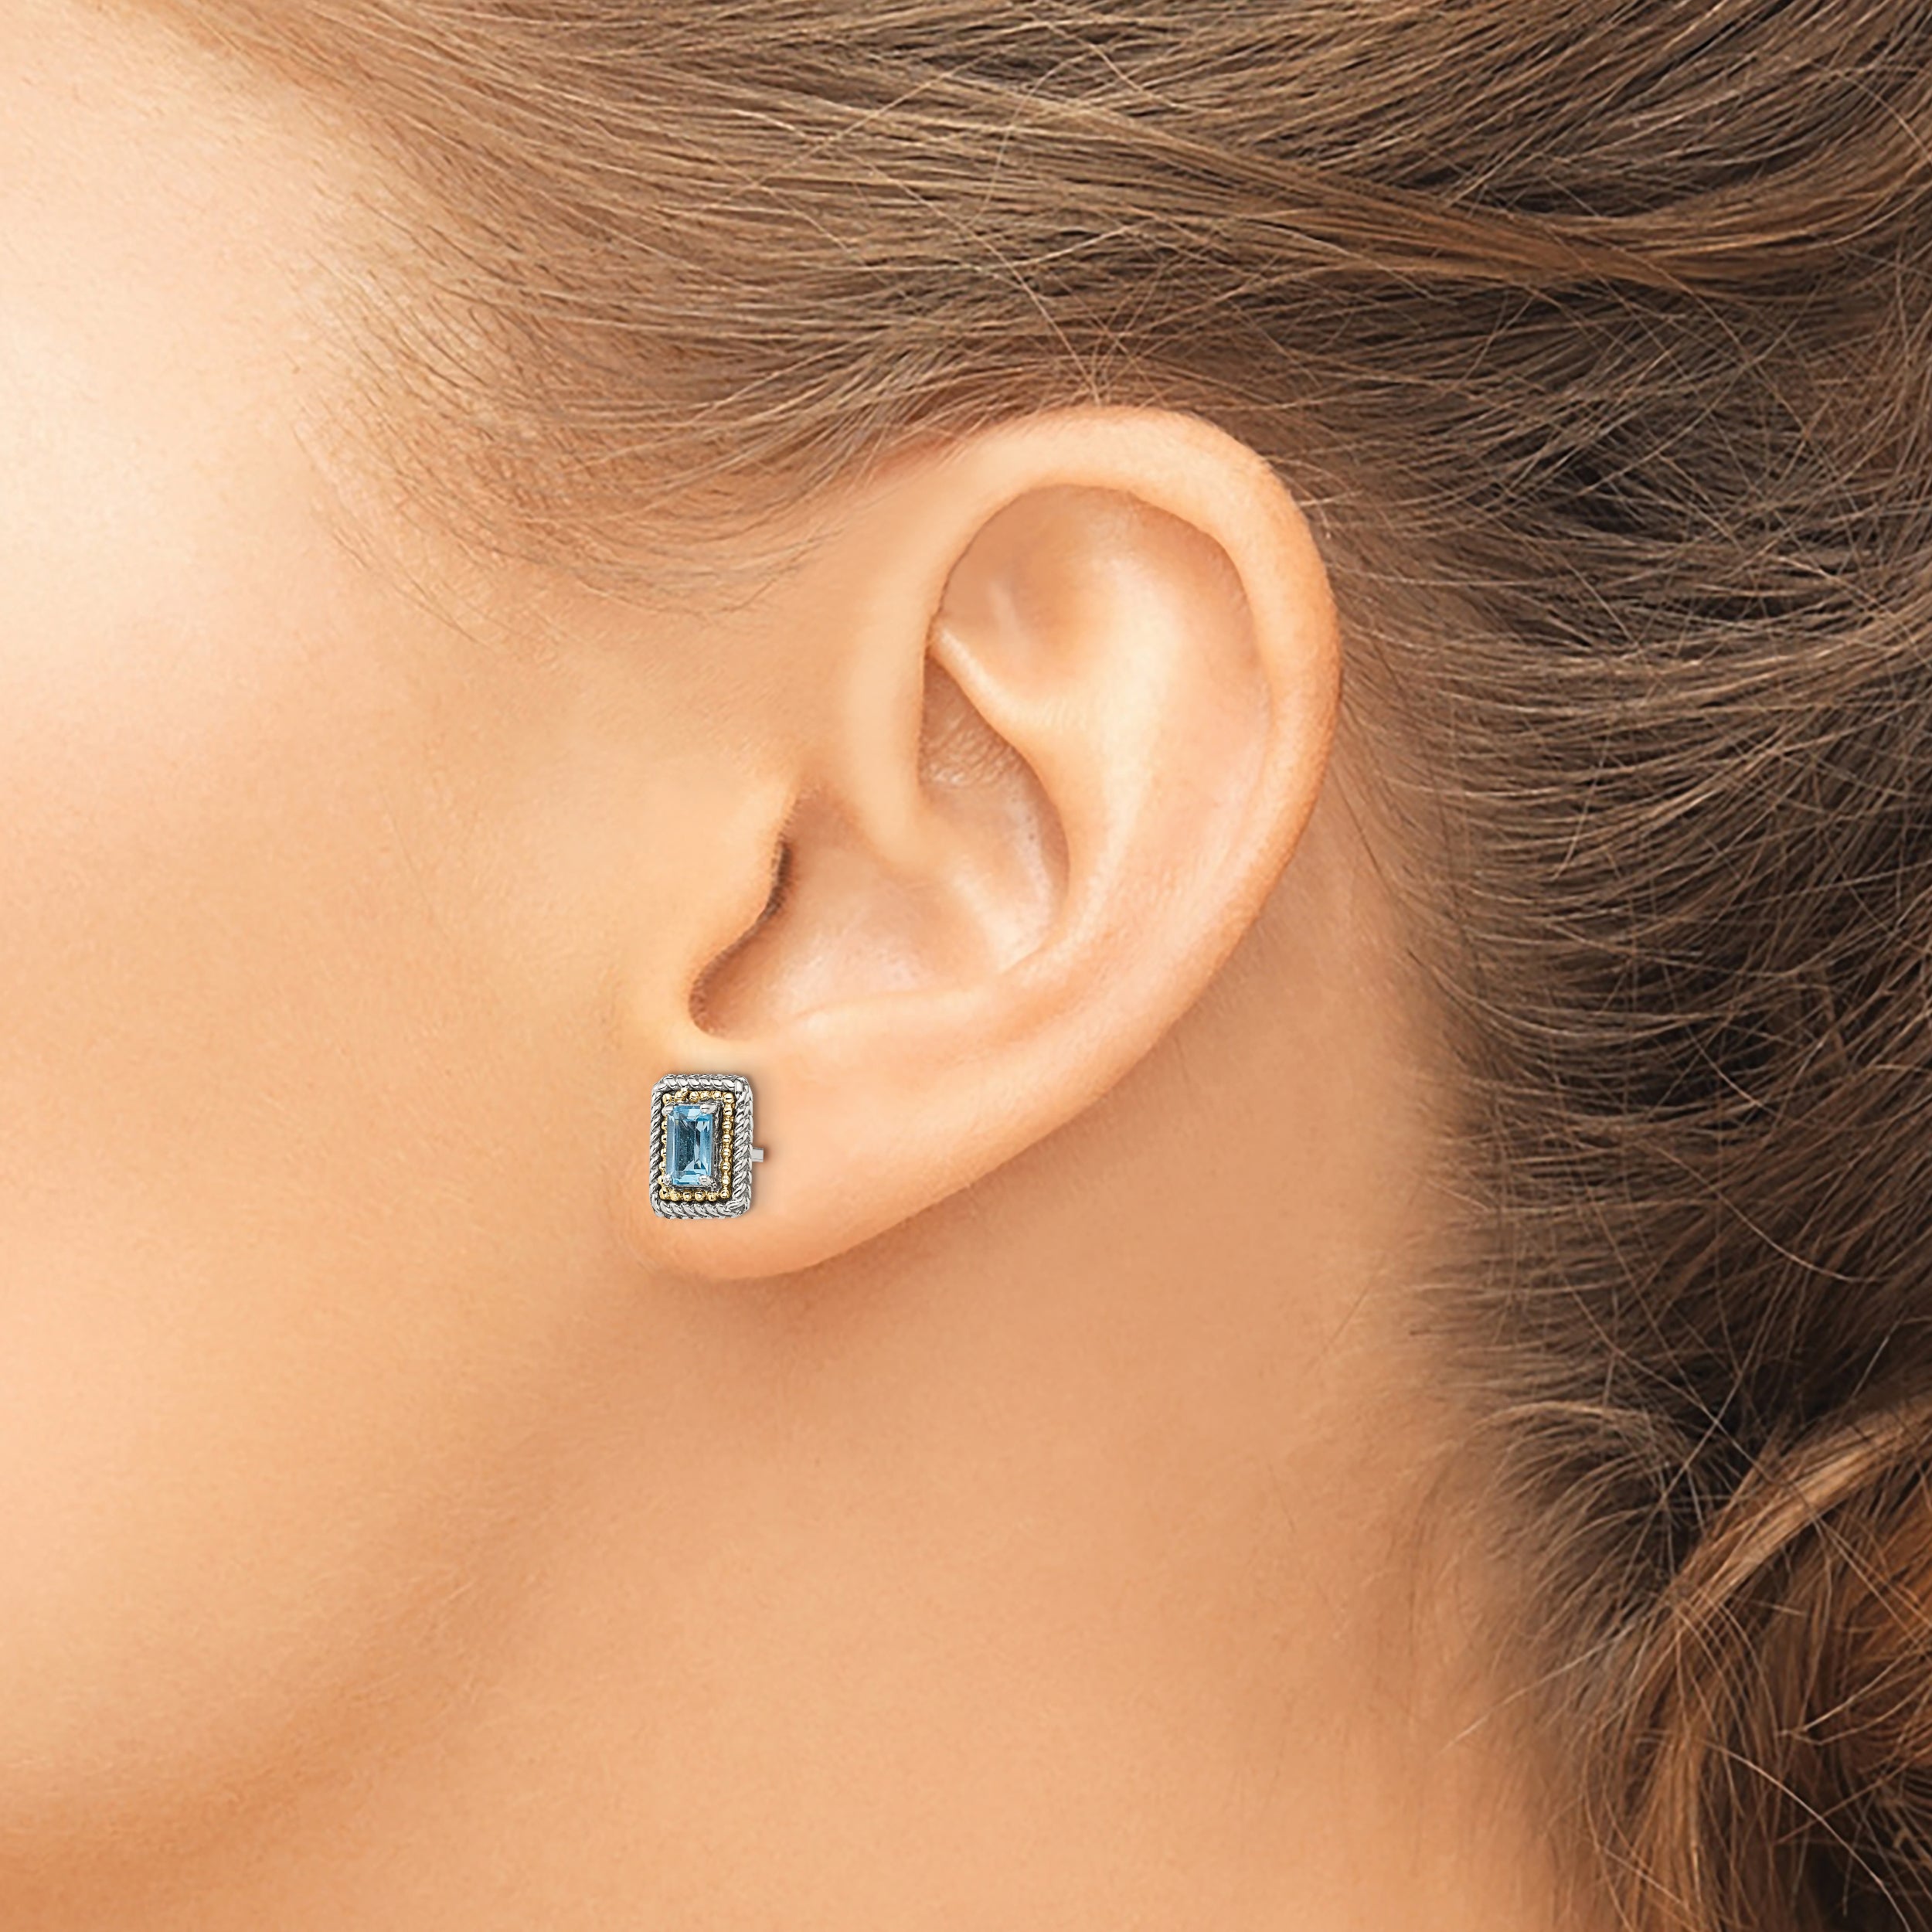 Shey Couture Sterling Silver with 14K Accent Antiqued Emerald-cut Blue Topaz Post Earrings